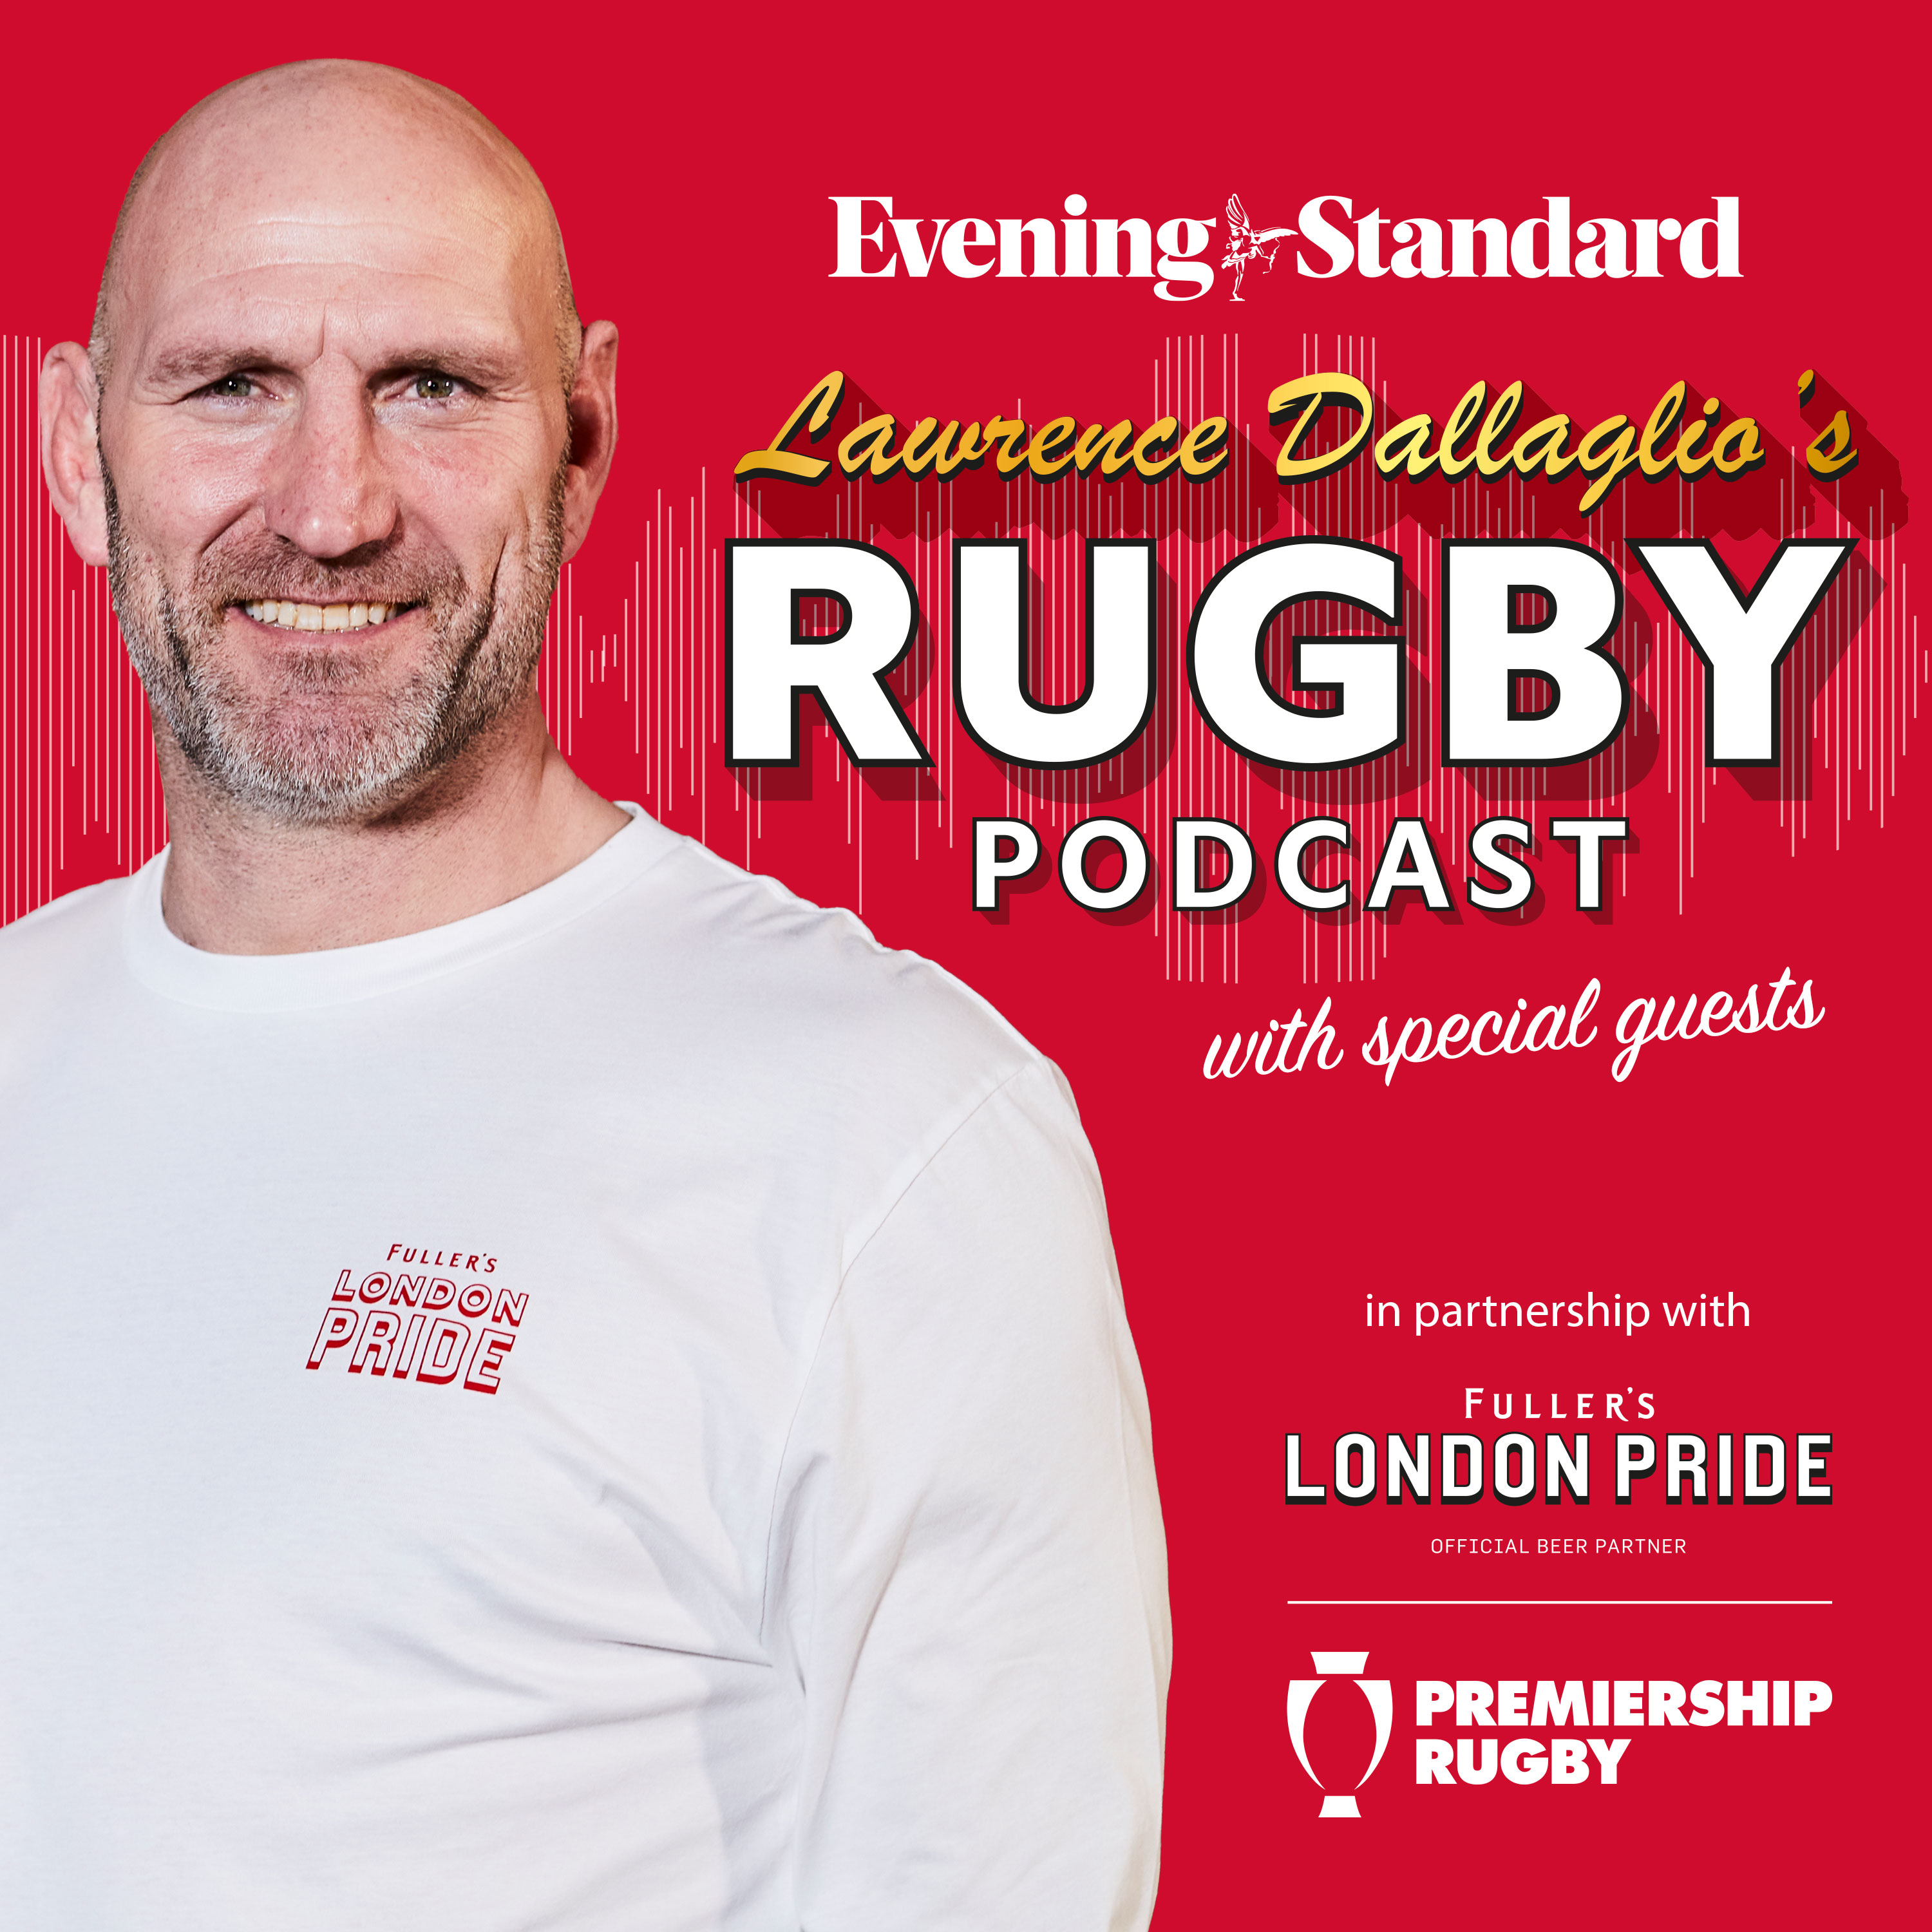 So, about that Six Nations... with Scott Quinnell, Adam Whitty and Will Macpherson